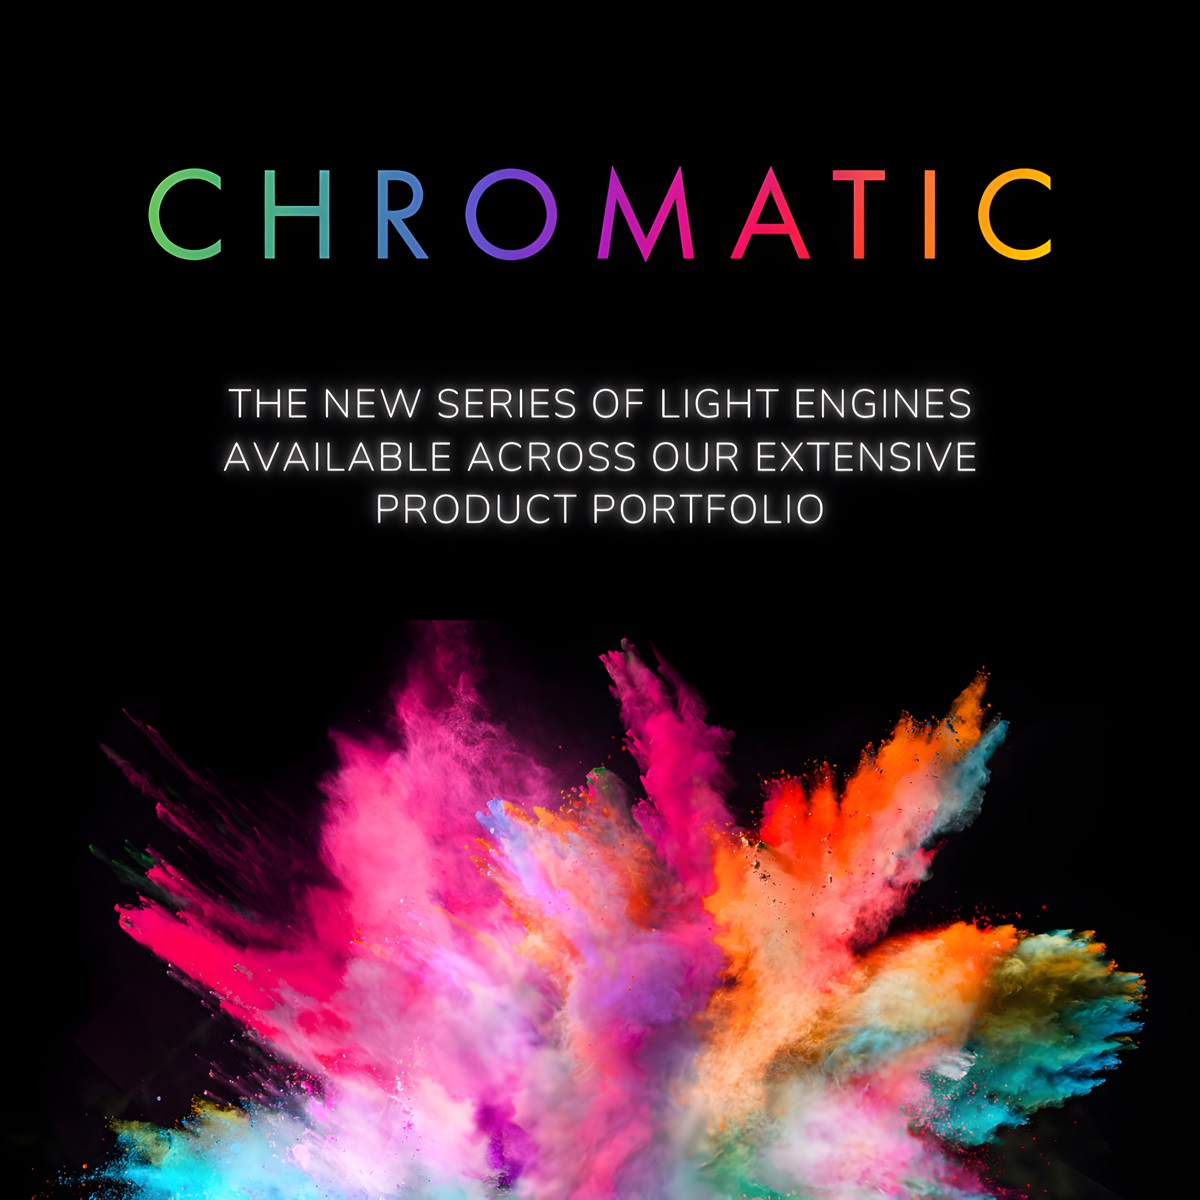 alphaLED Introduces the Chromatic Series Color Tunable Light Engines